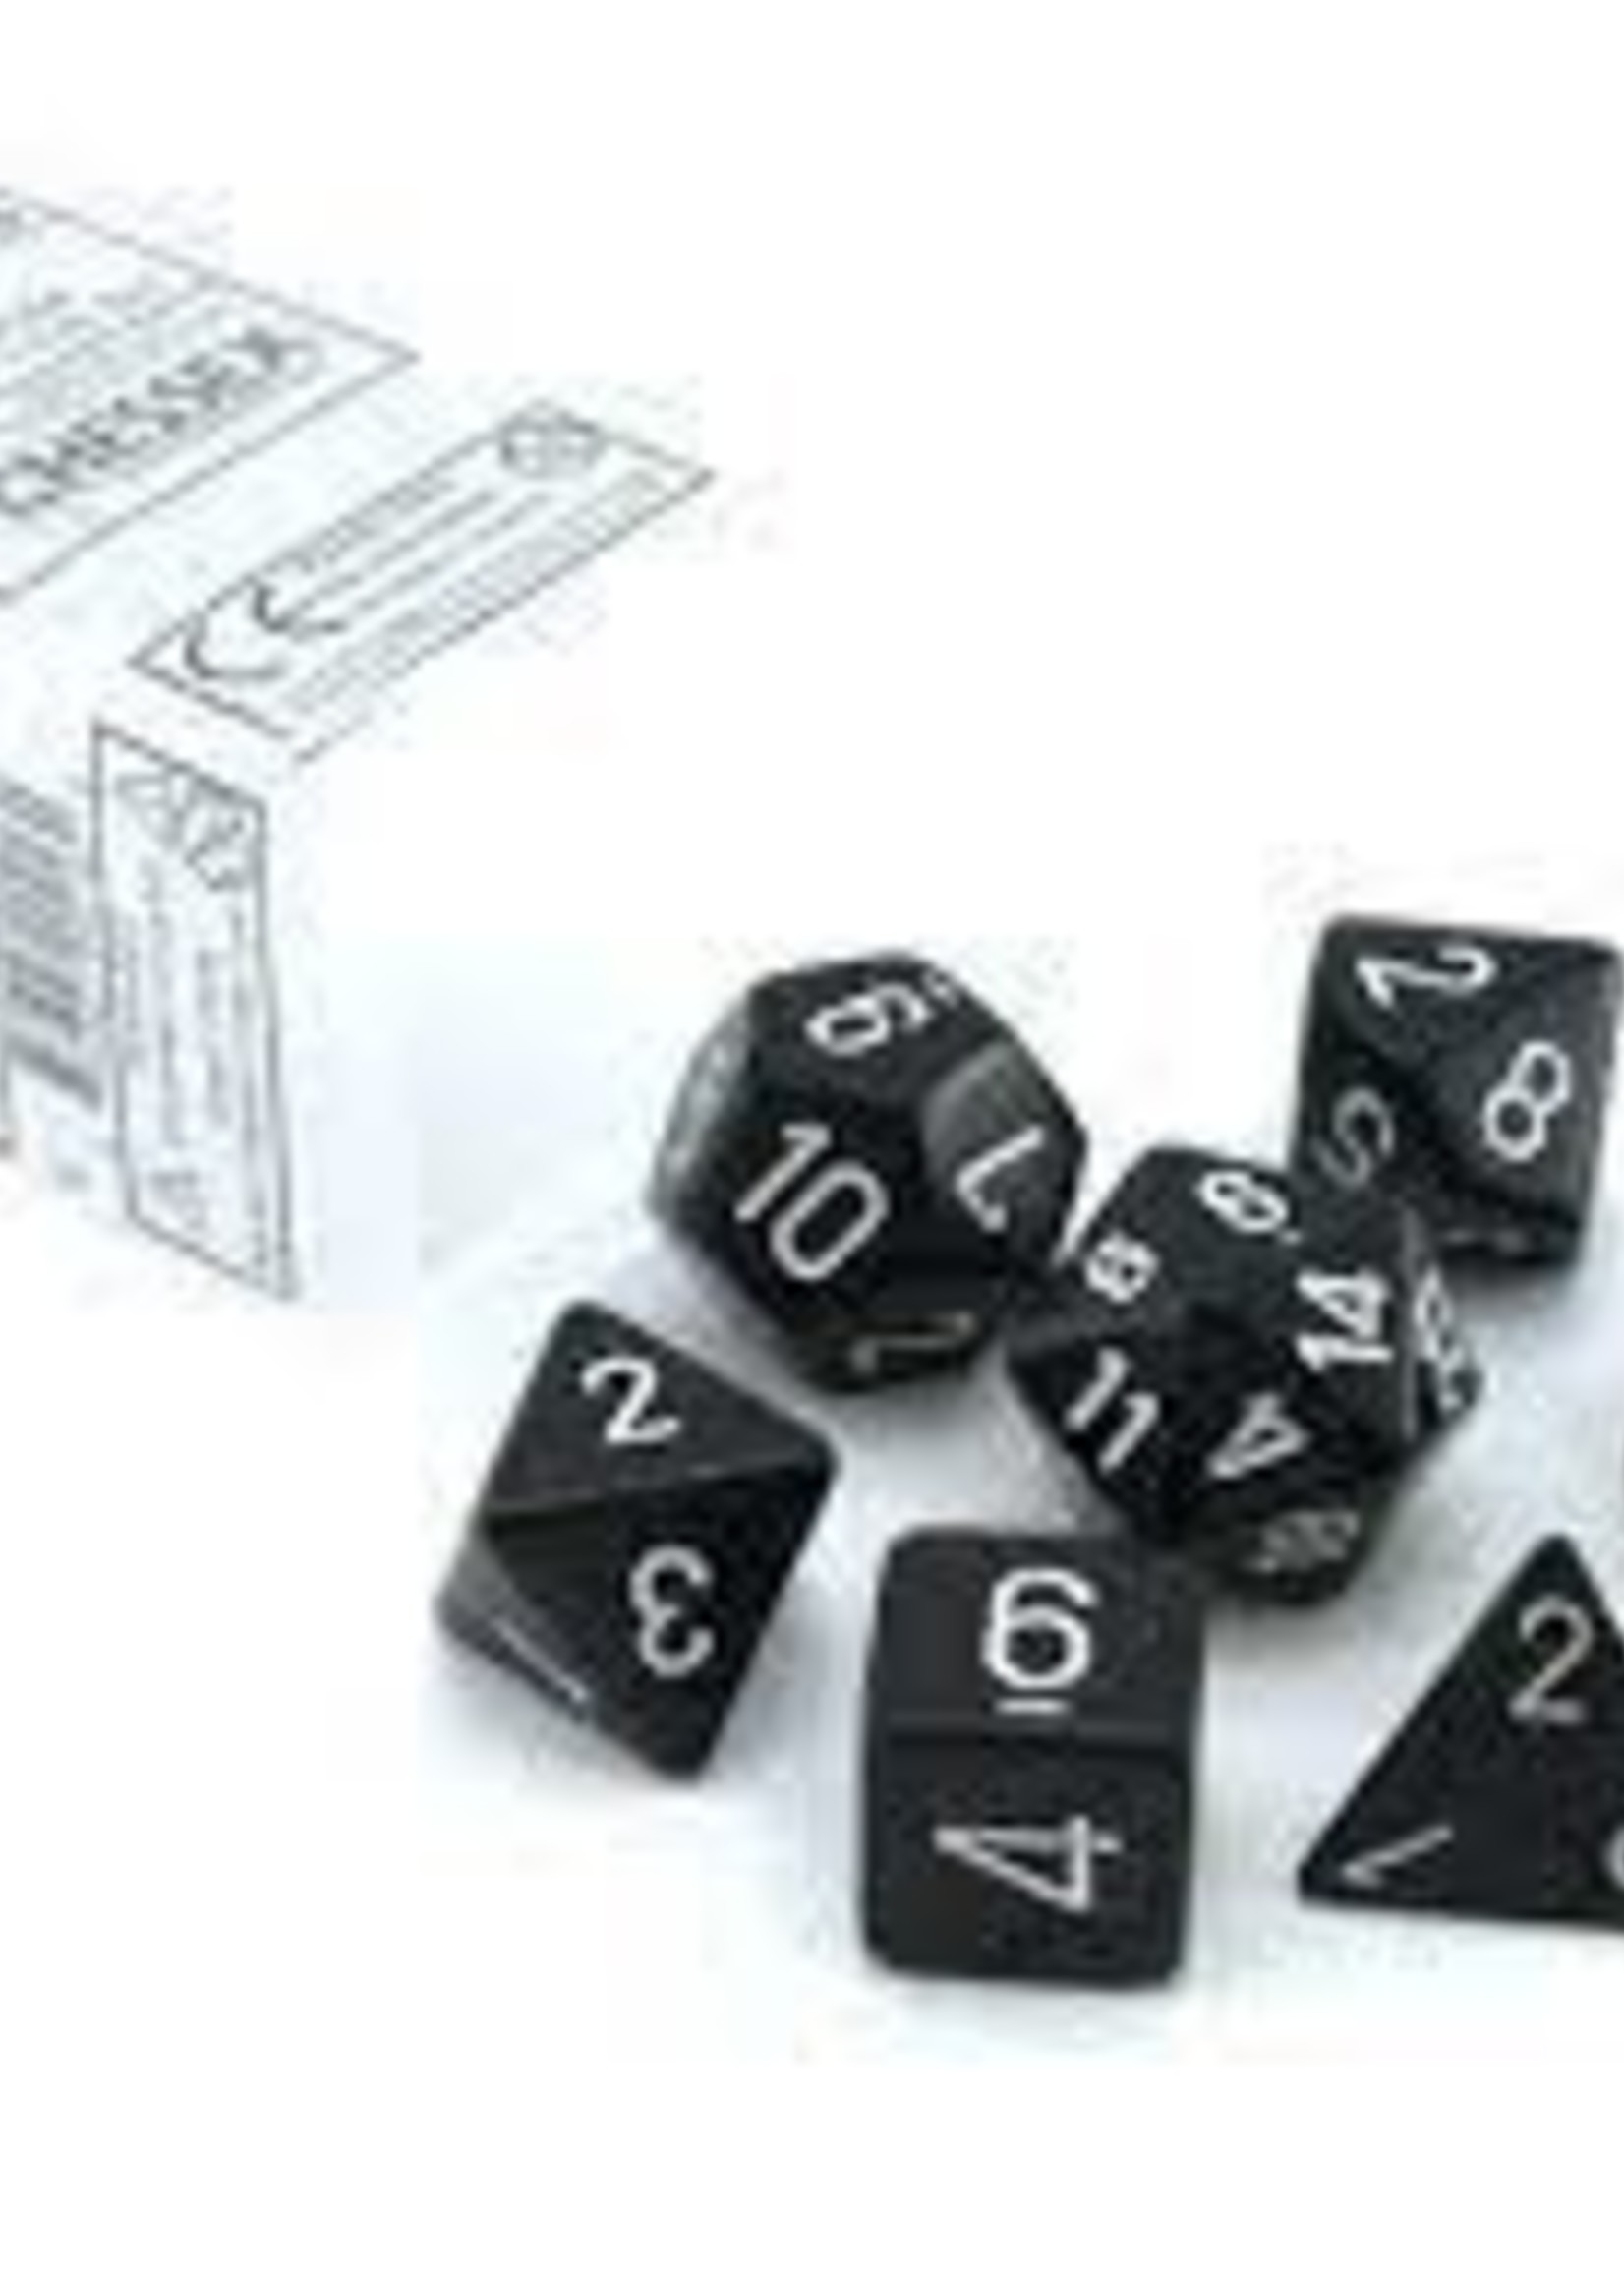 Chessex Chessex Dice Opaque Polyhedral 7-die set